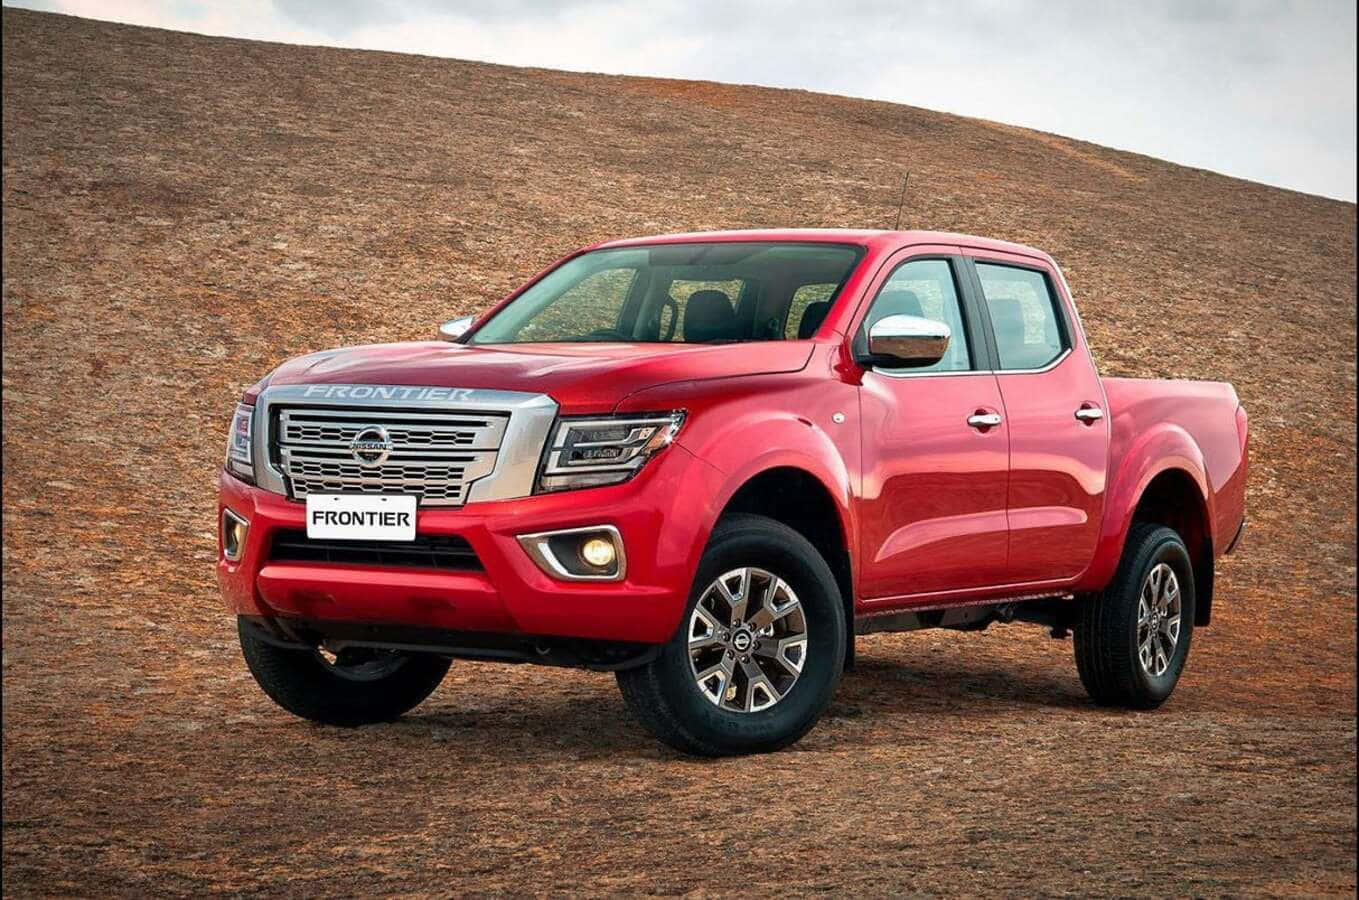 A Rugged Nissan Frontier Conquering The Off-road In Style Wallpaper